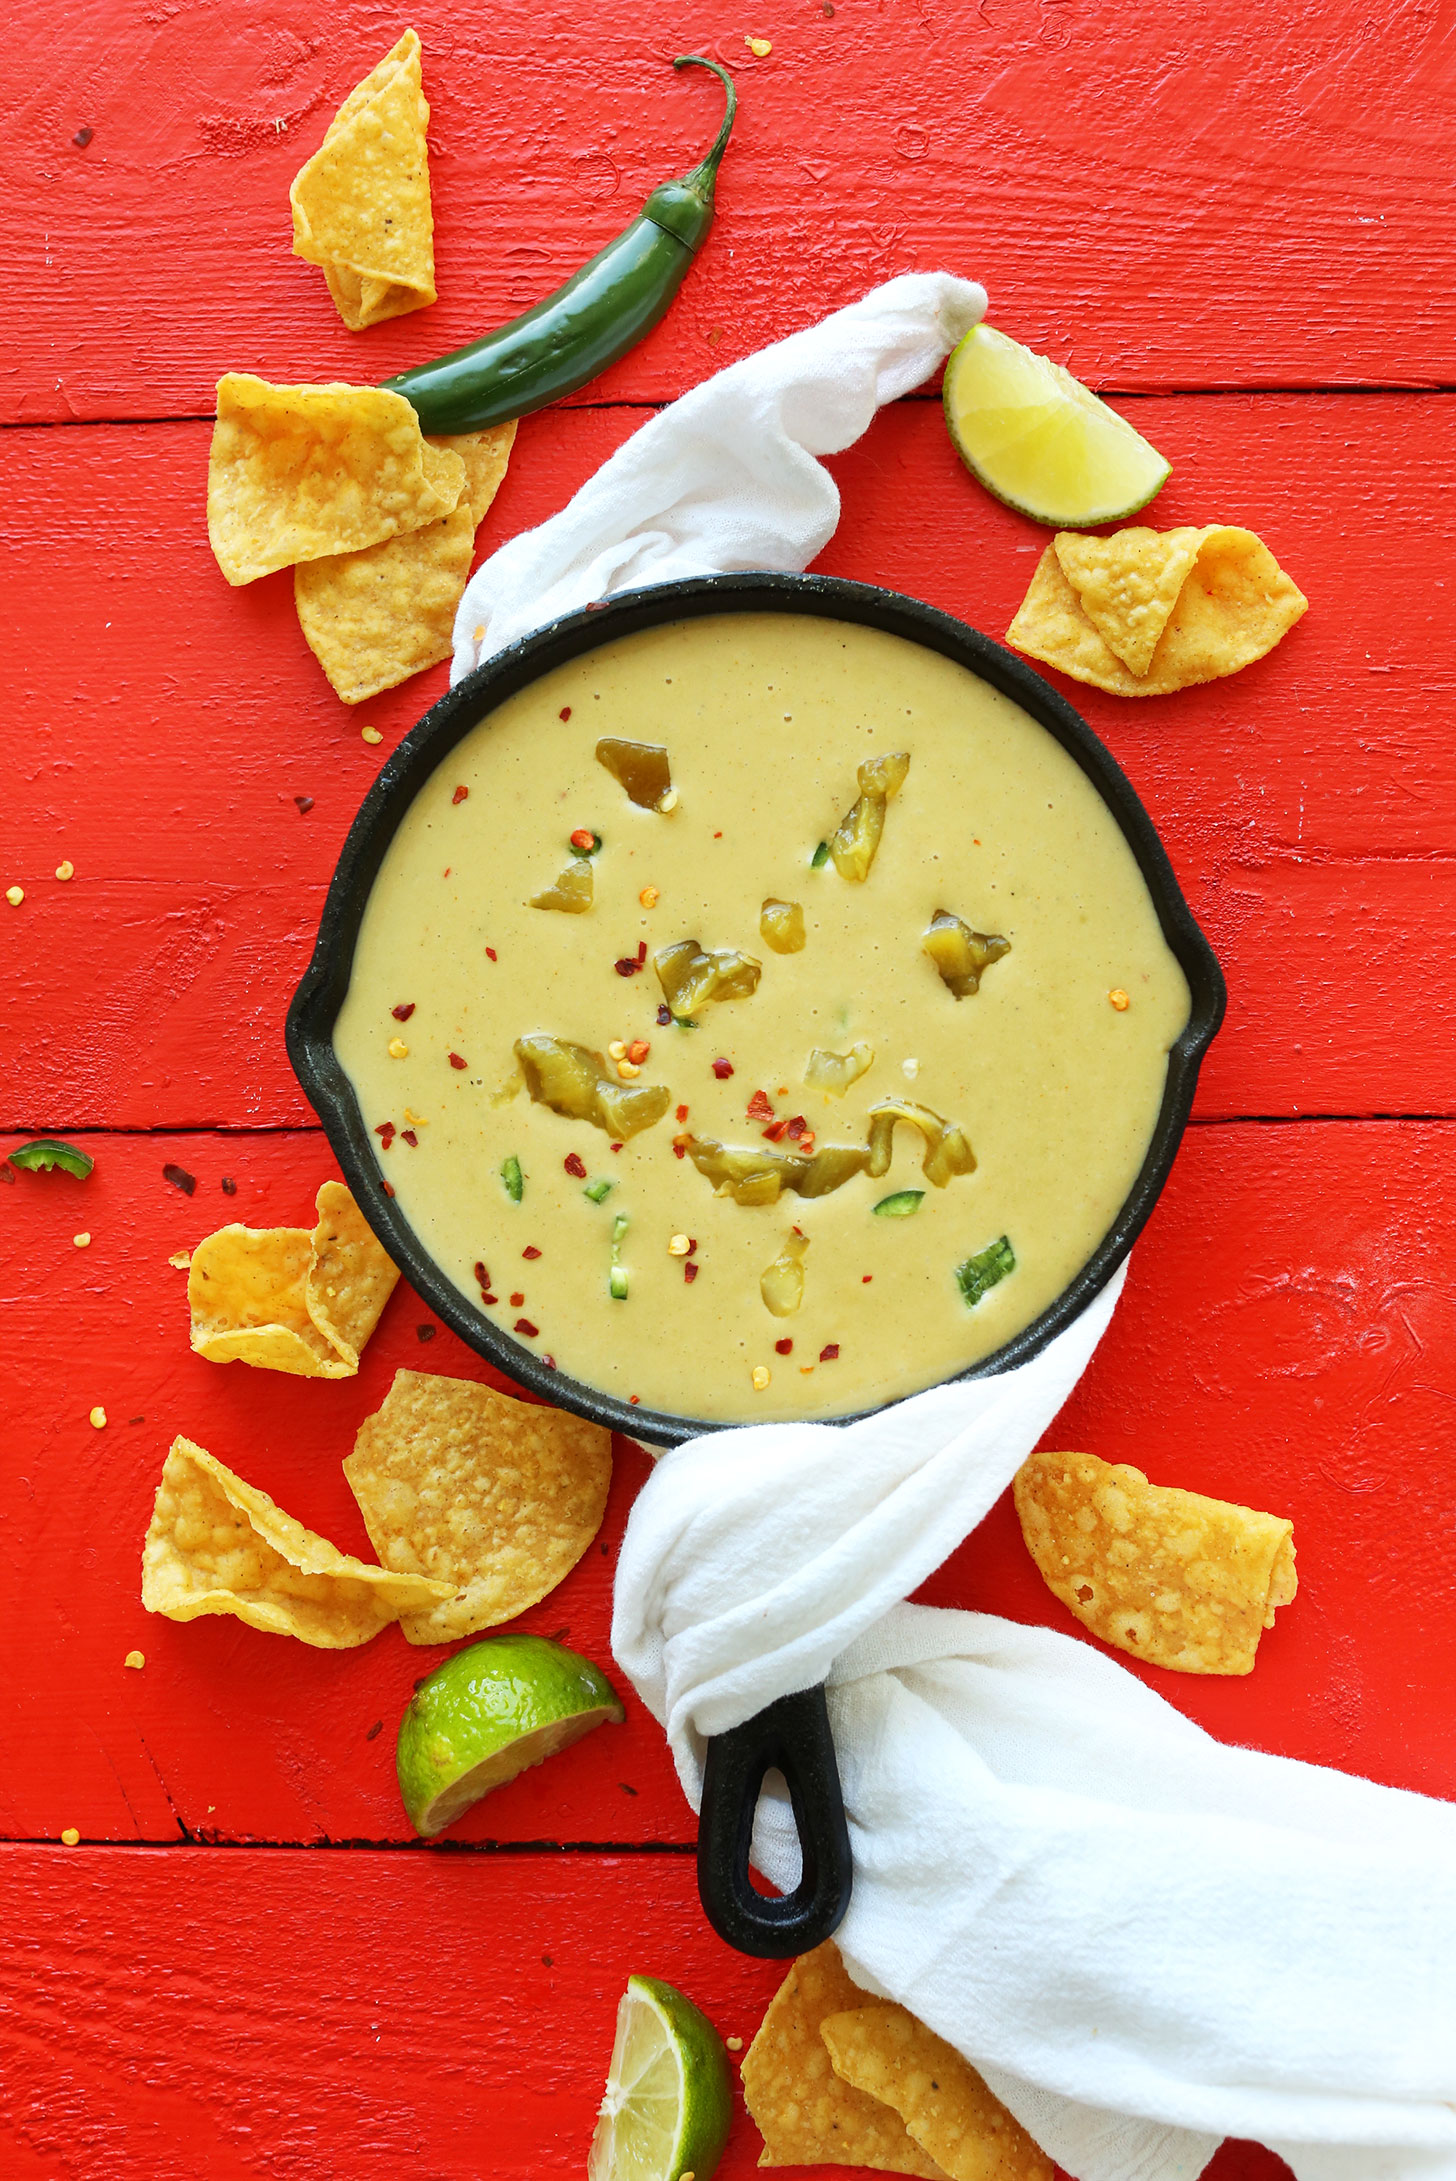 Cast-iron skillet filled with our Vegan Green Chili Queso surrounded by tortilla chips